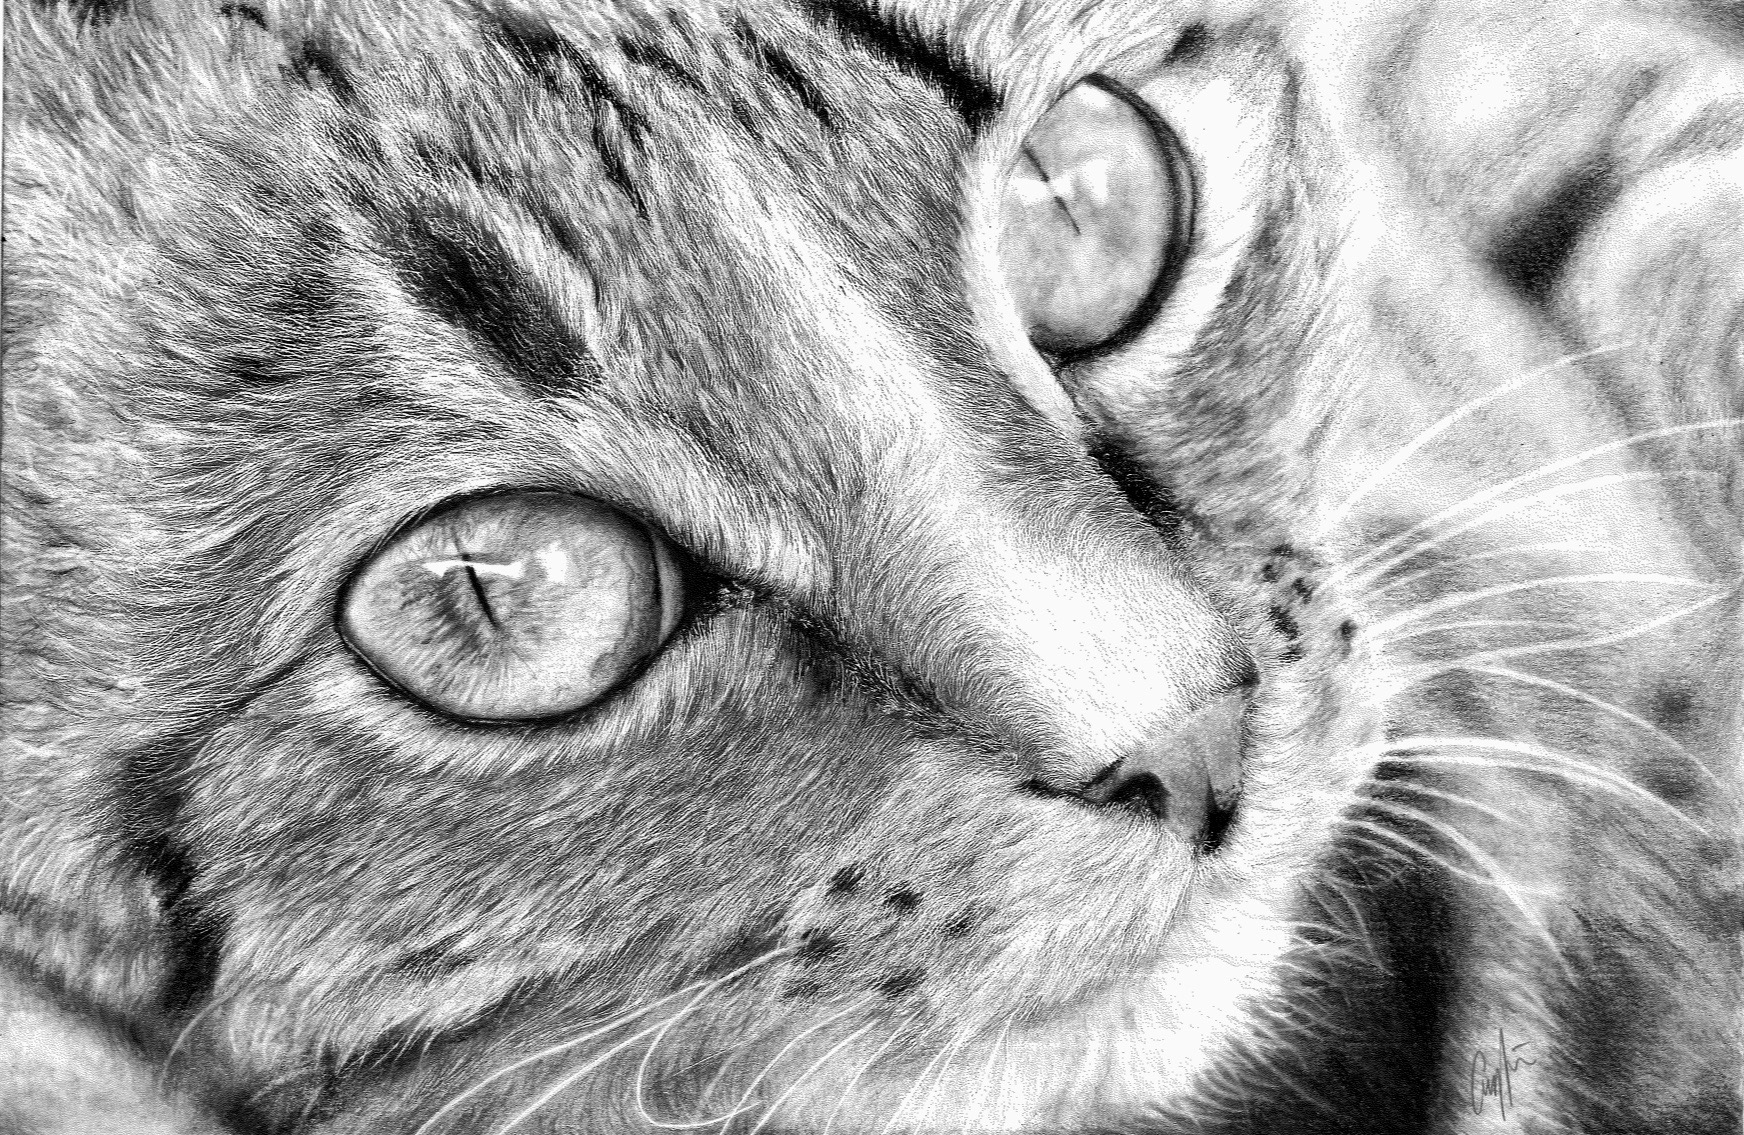 Cat face Pencil drawing by Pyrcias on DeviantArt